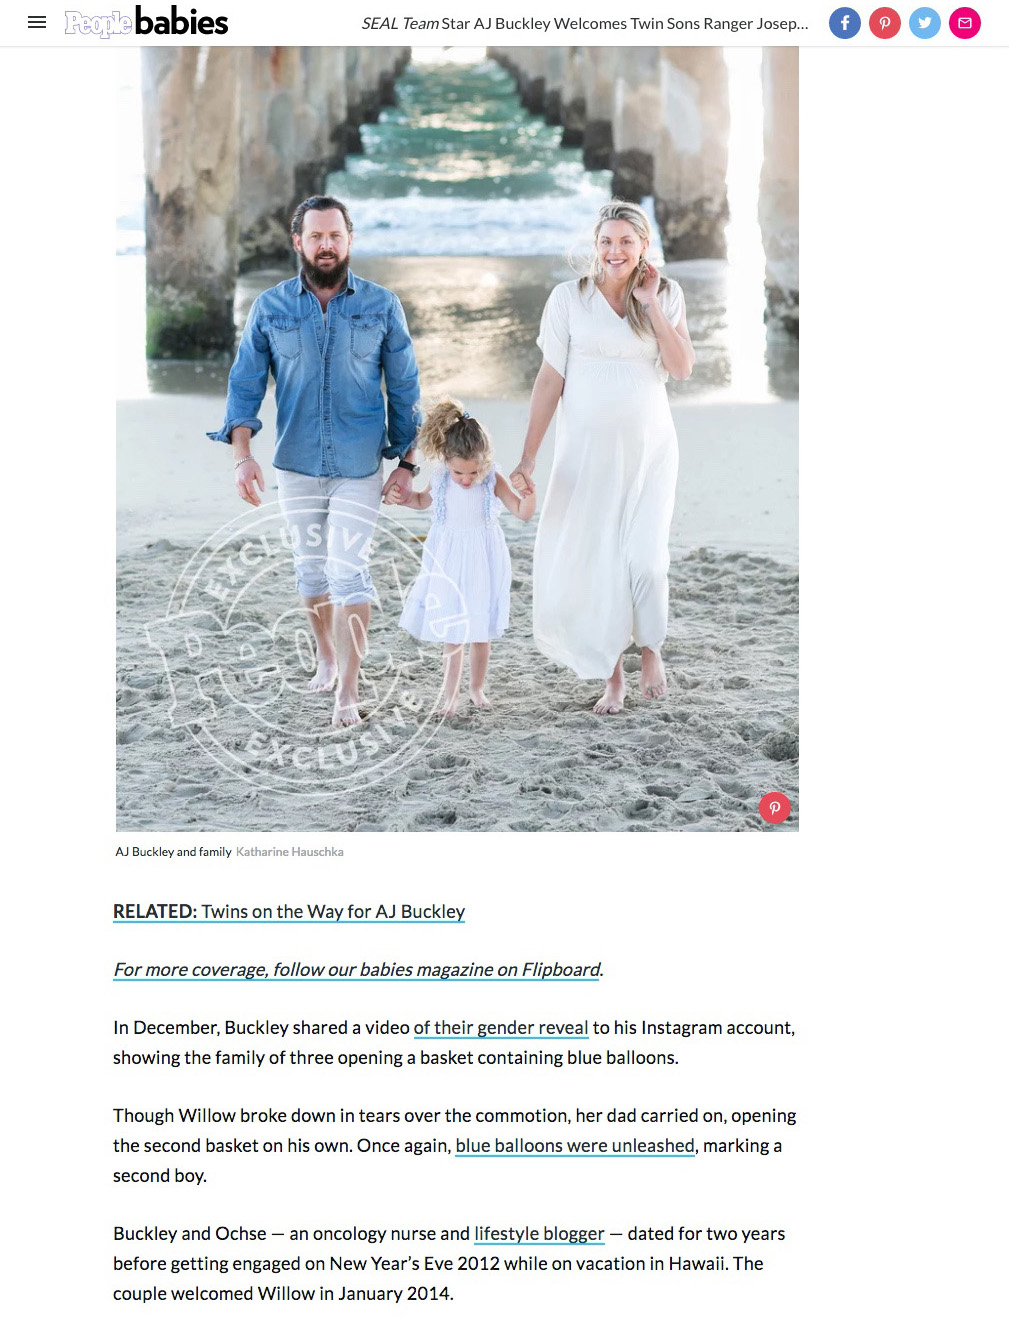 Page 2 - SEAL Team Star AJ Buckley and Wife Welcome Twin Sons